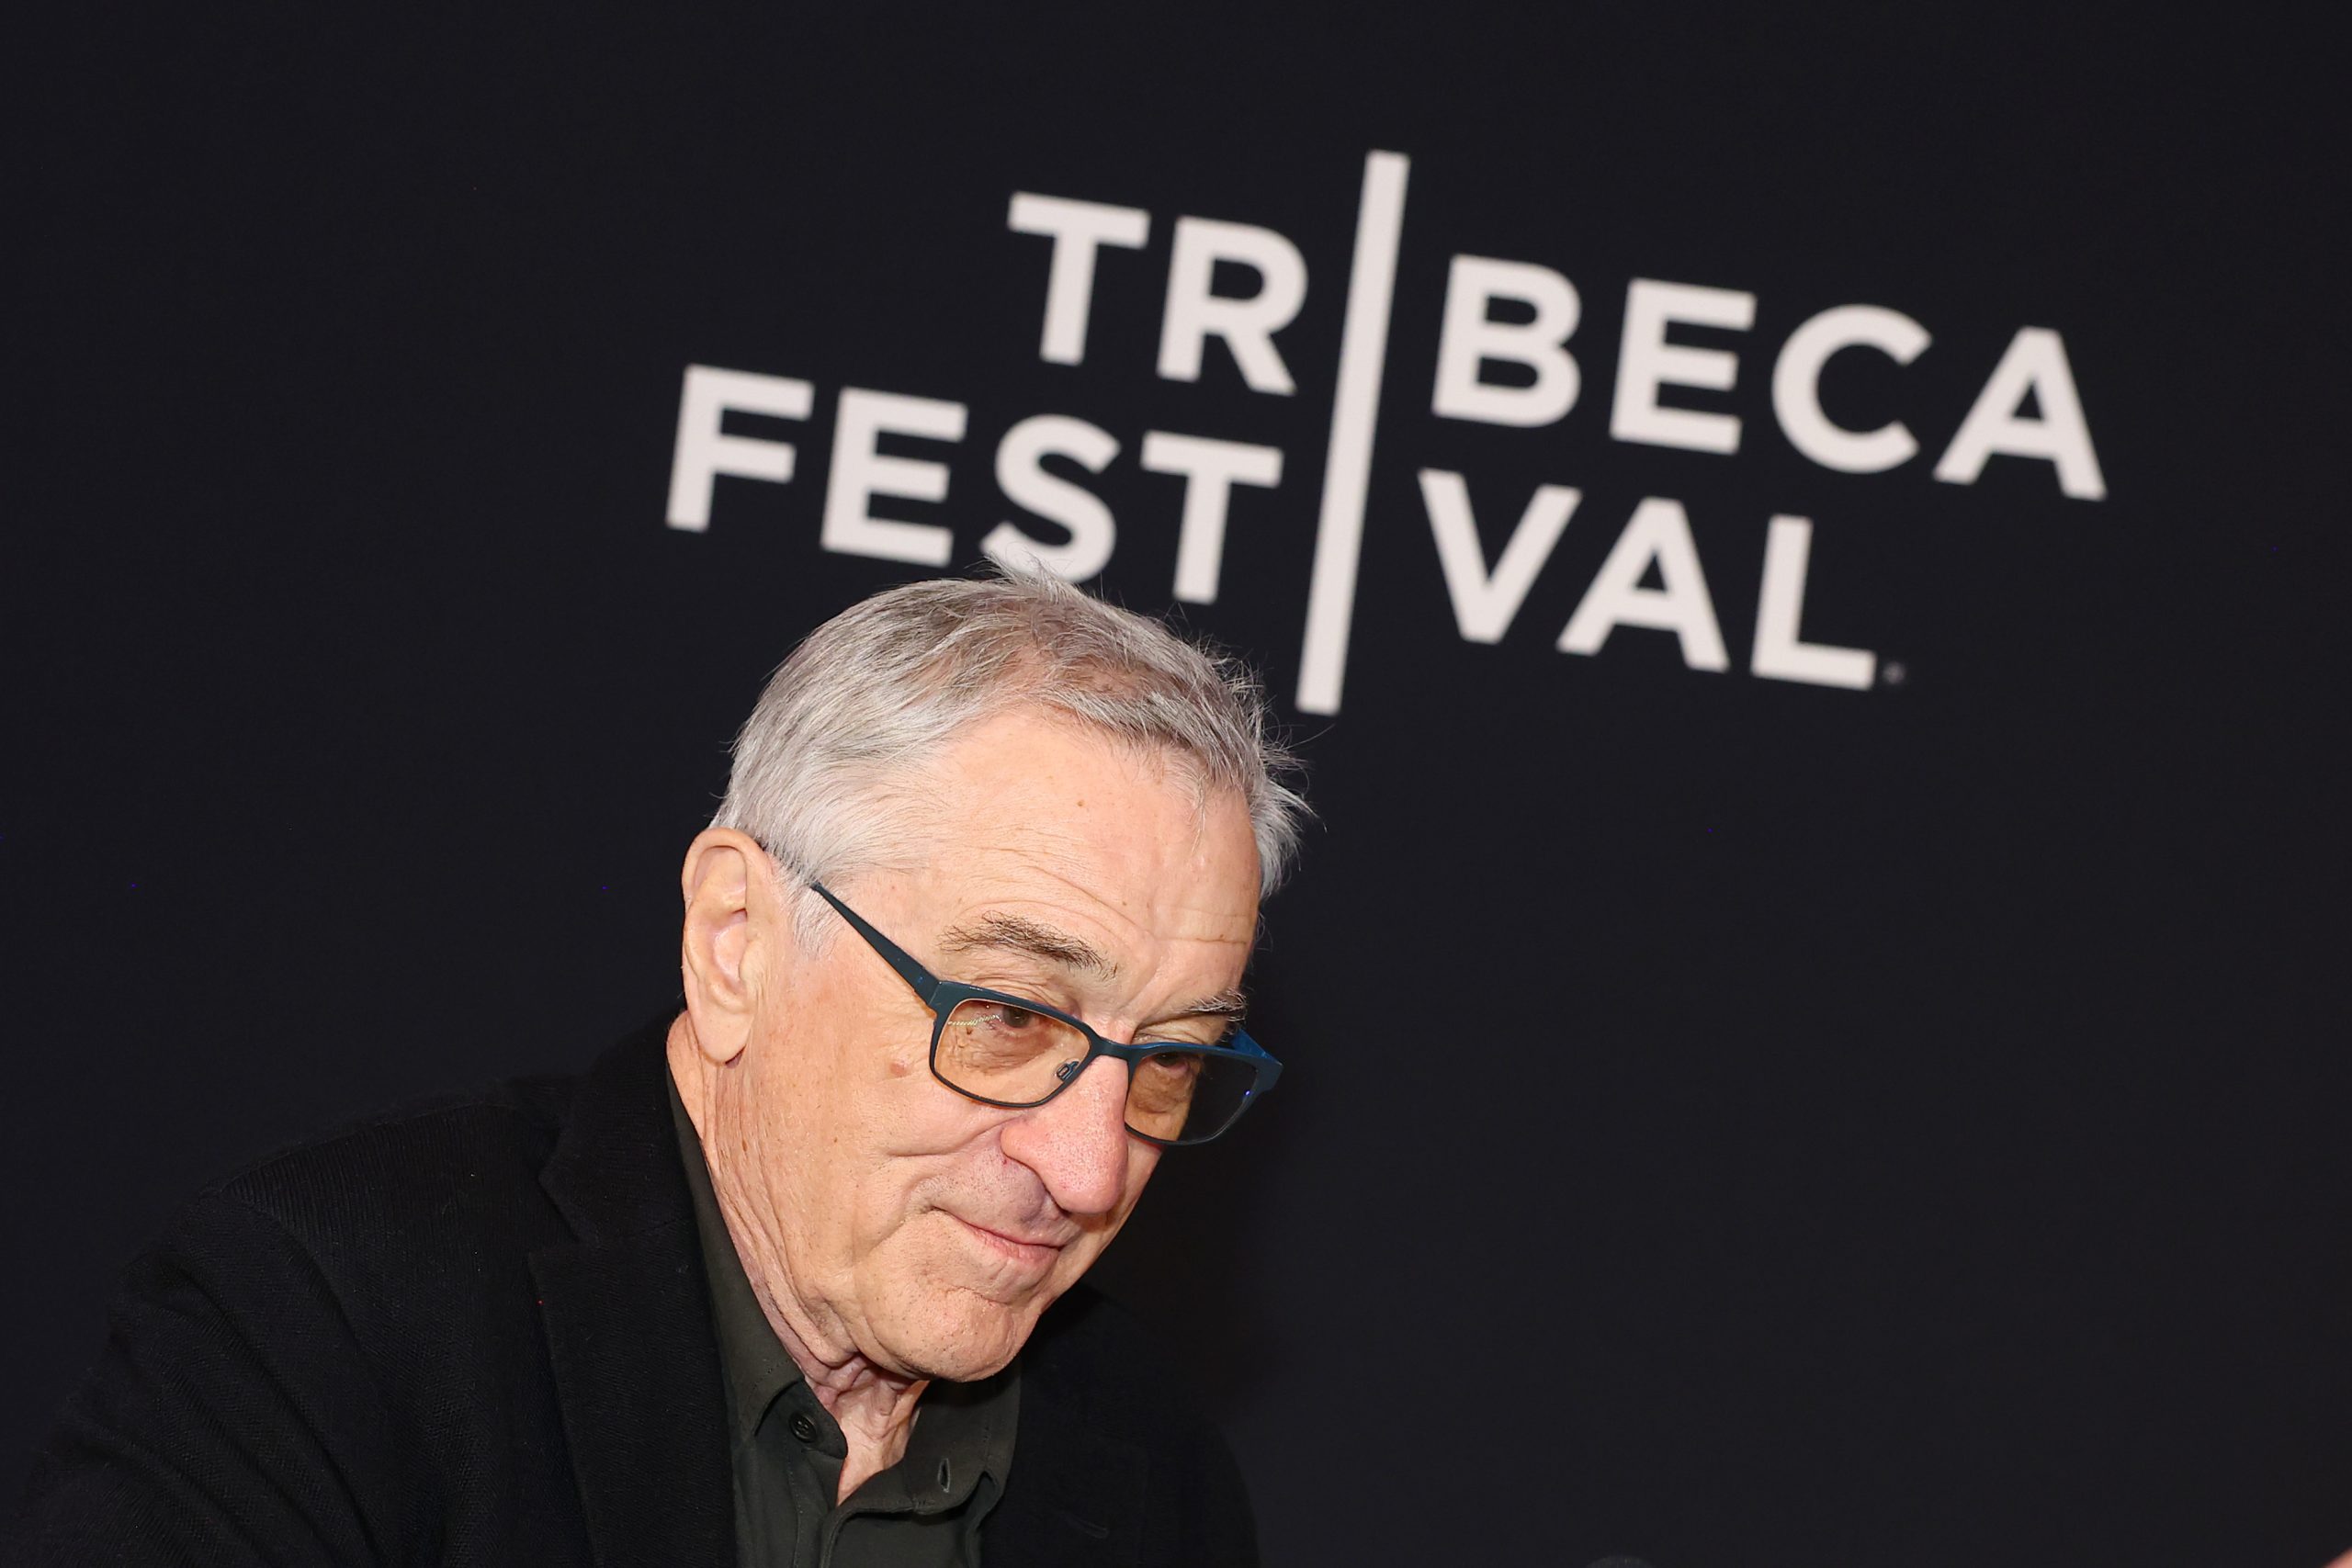 Uber, Robert De Niro Deny Reports of Reviving ‘Taxi Driver’ Character for Commercial